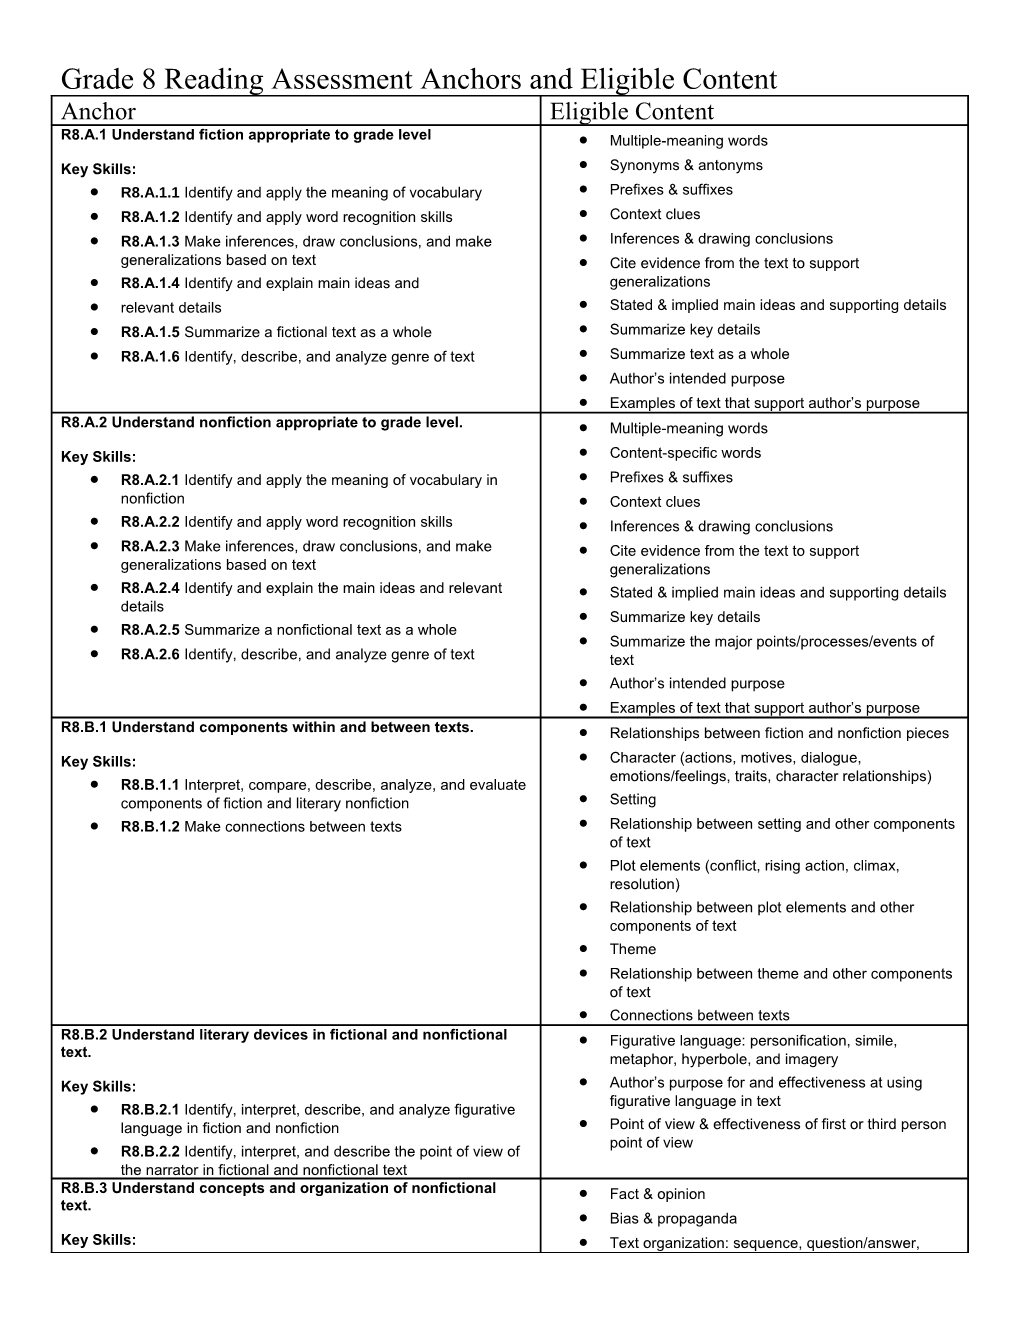 Grade 7 Reading Assessment Anchors and Eligible Content